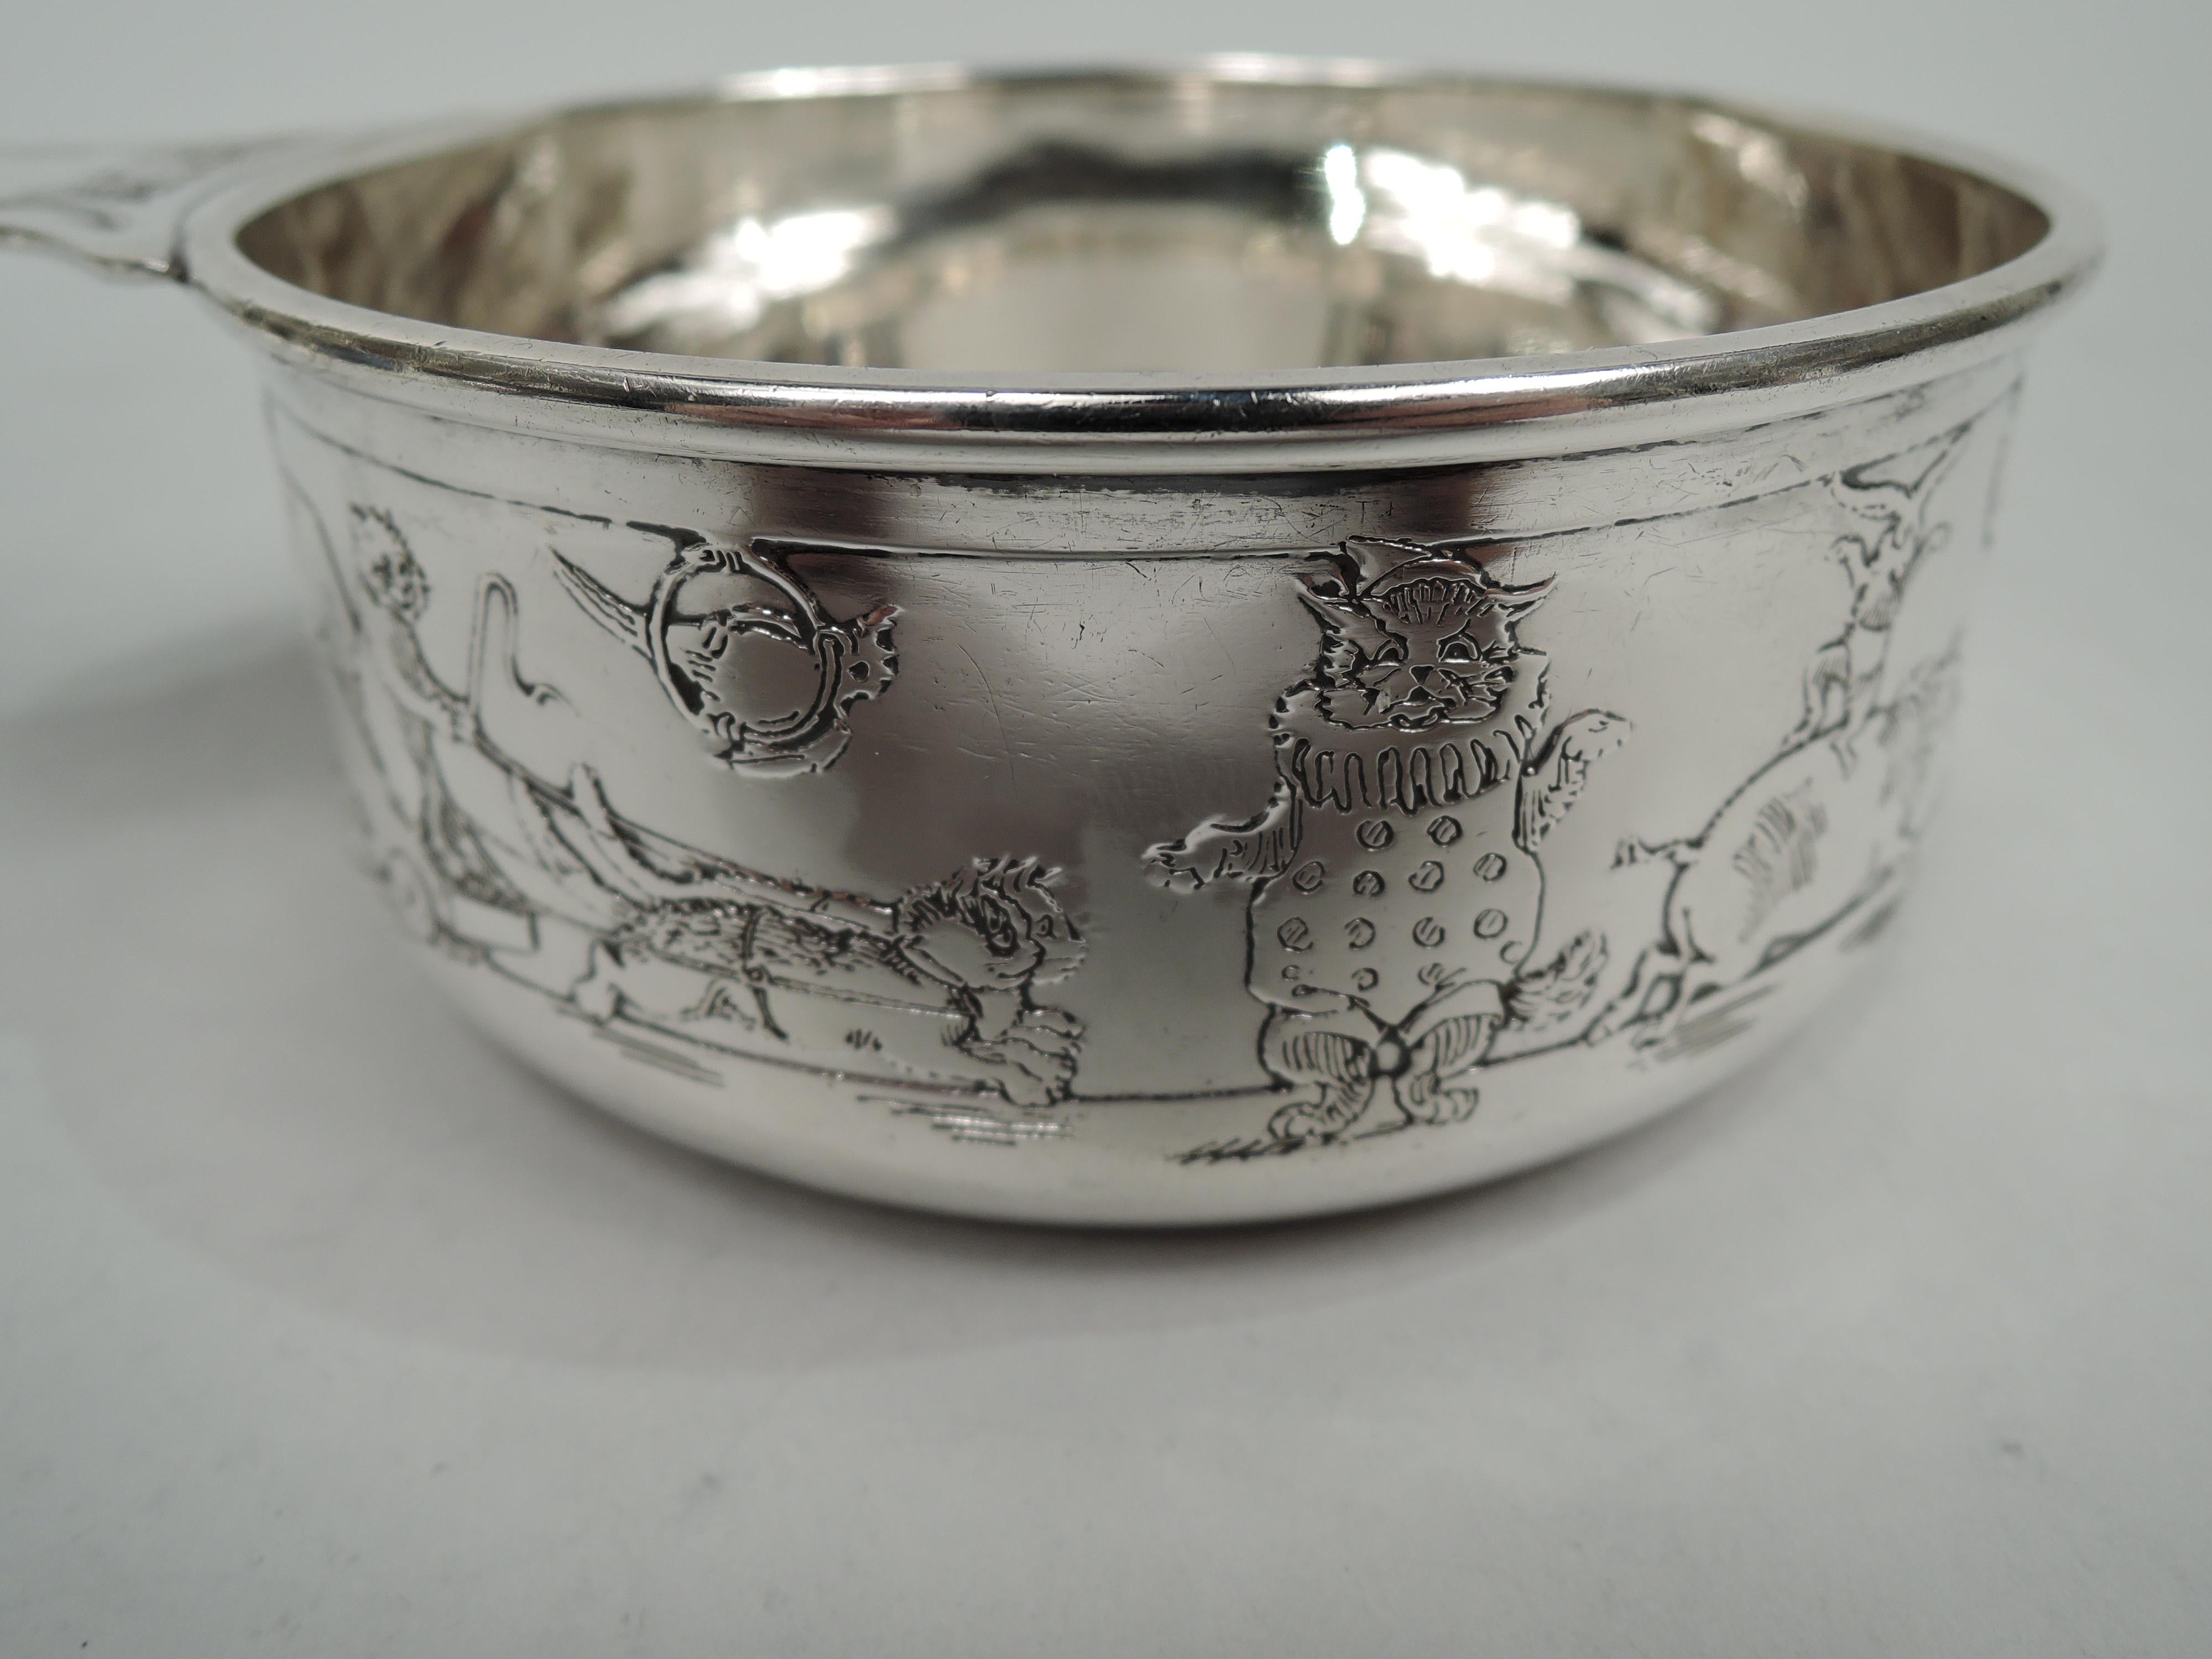 Edwardian sterling silver porringer with circus motif. Made by William B. Kerr in Newark, ca 1910. Upward tapering sides and molded rim. Solid and waisted handle. Acid-etched procession with piggies, kitties, and doggies as well as elephants and